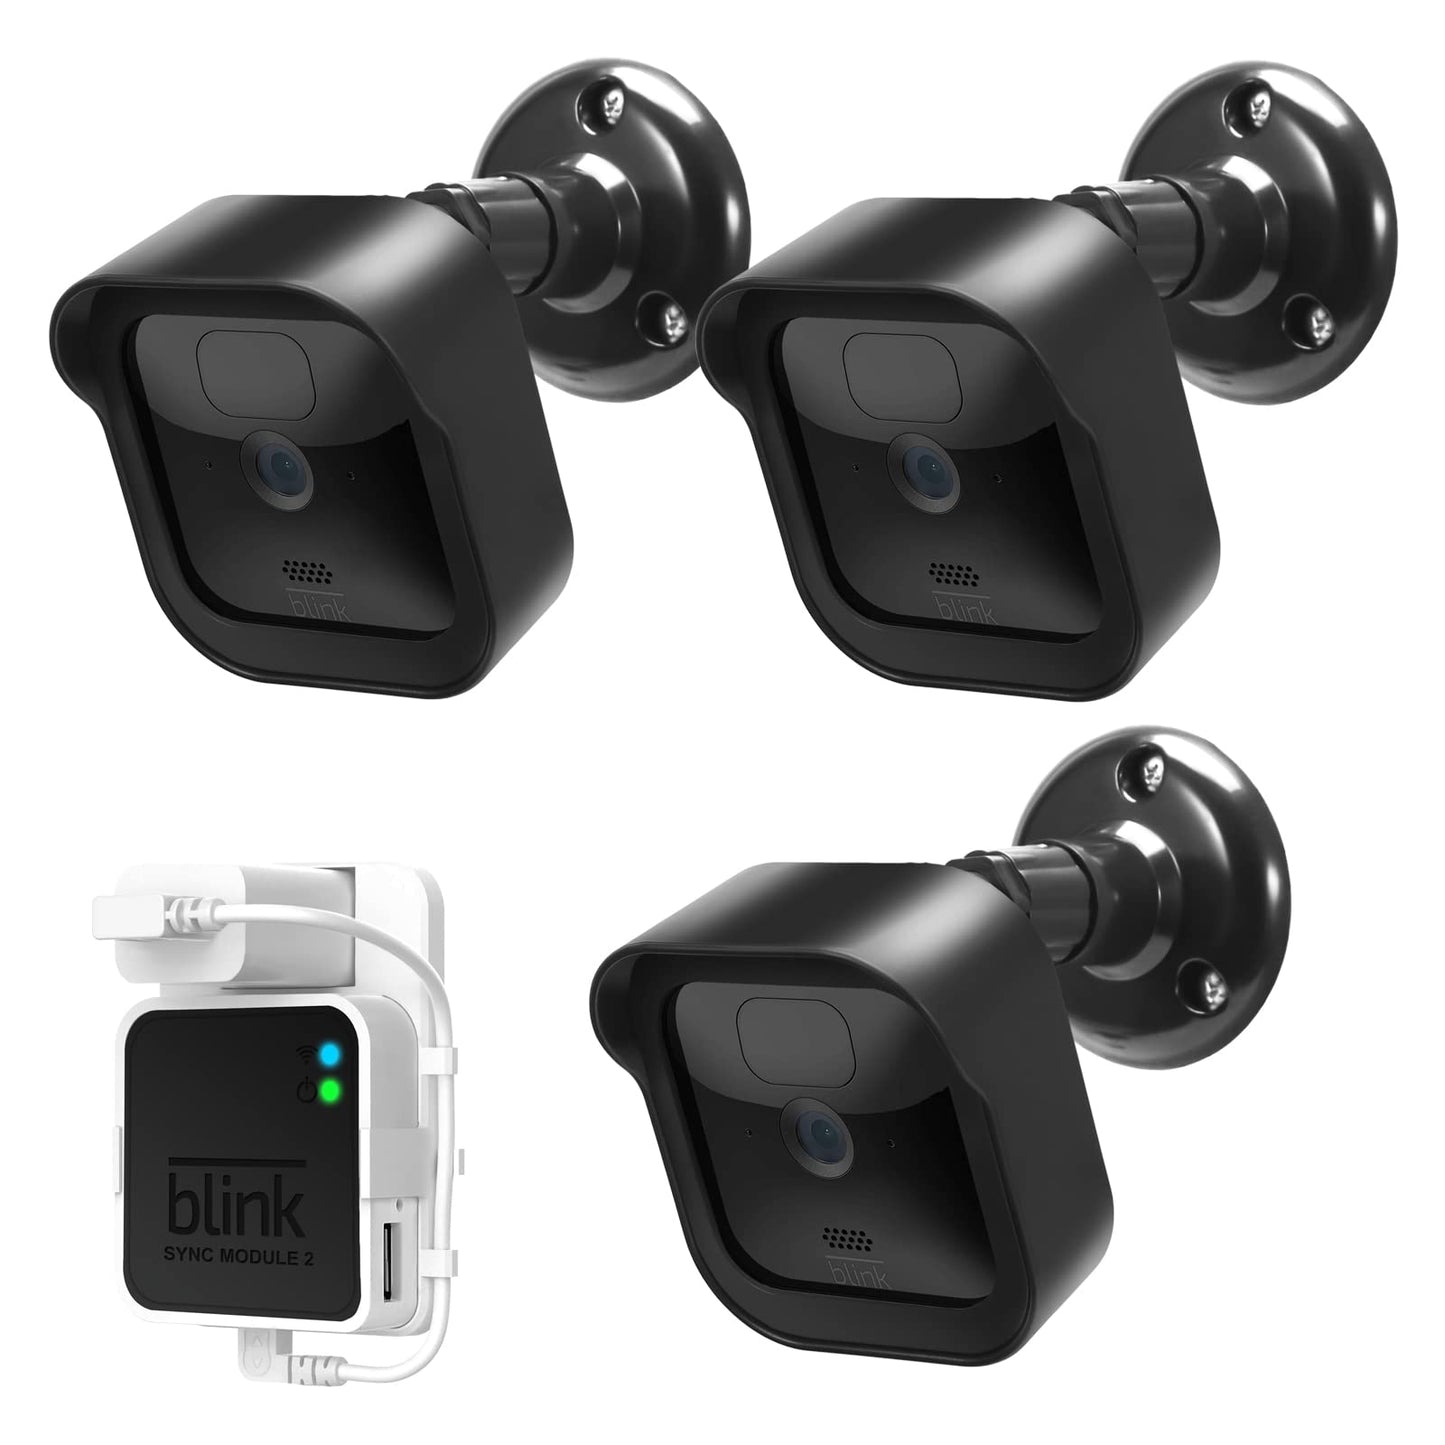 All-New Blink Outdoor Camera Wall Mount, Weatherproof Protective Housing and 360 Degree Adjustable Mount with Blink Sync Module 2 Mount for Blink Outdoor Security Camera System (Black 3Pack)